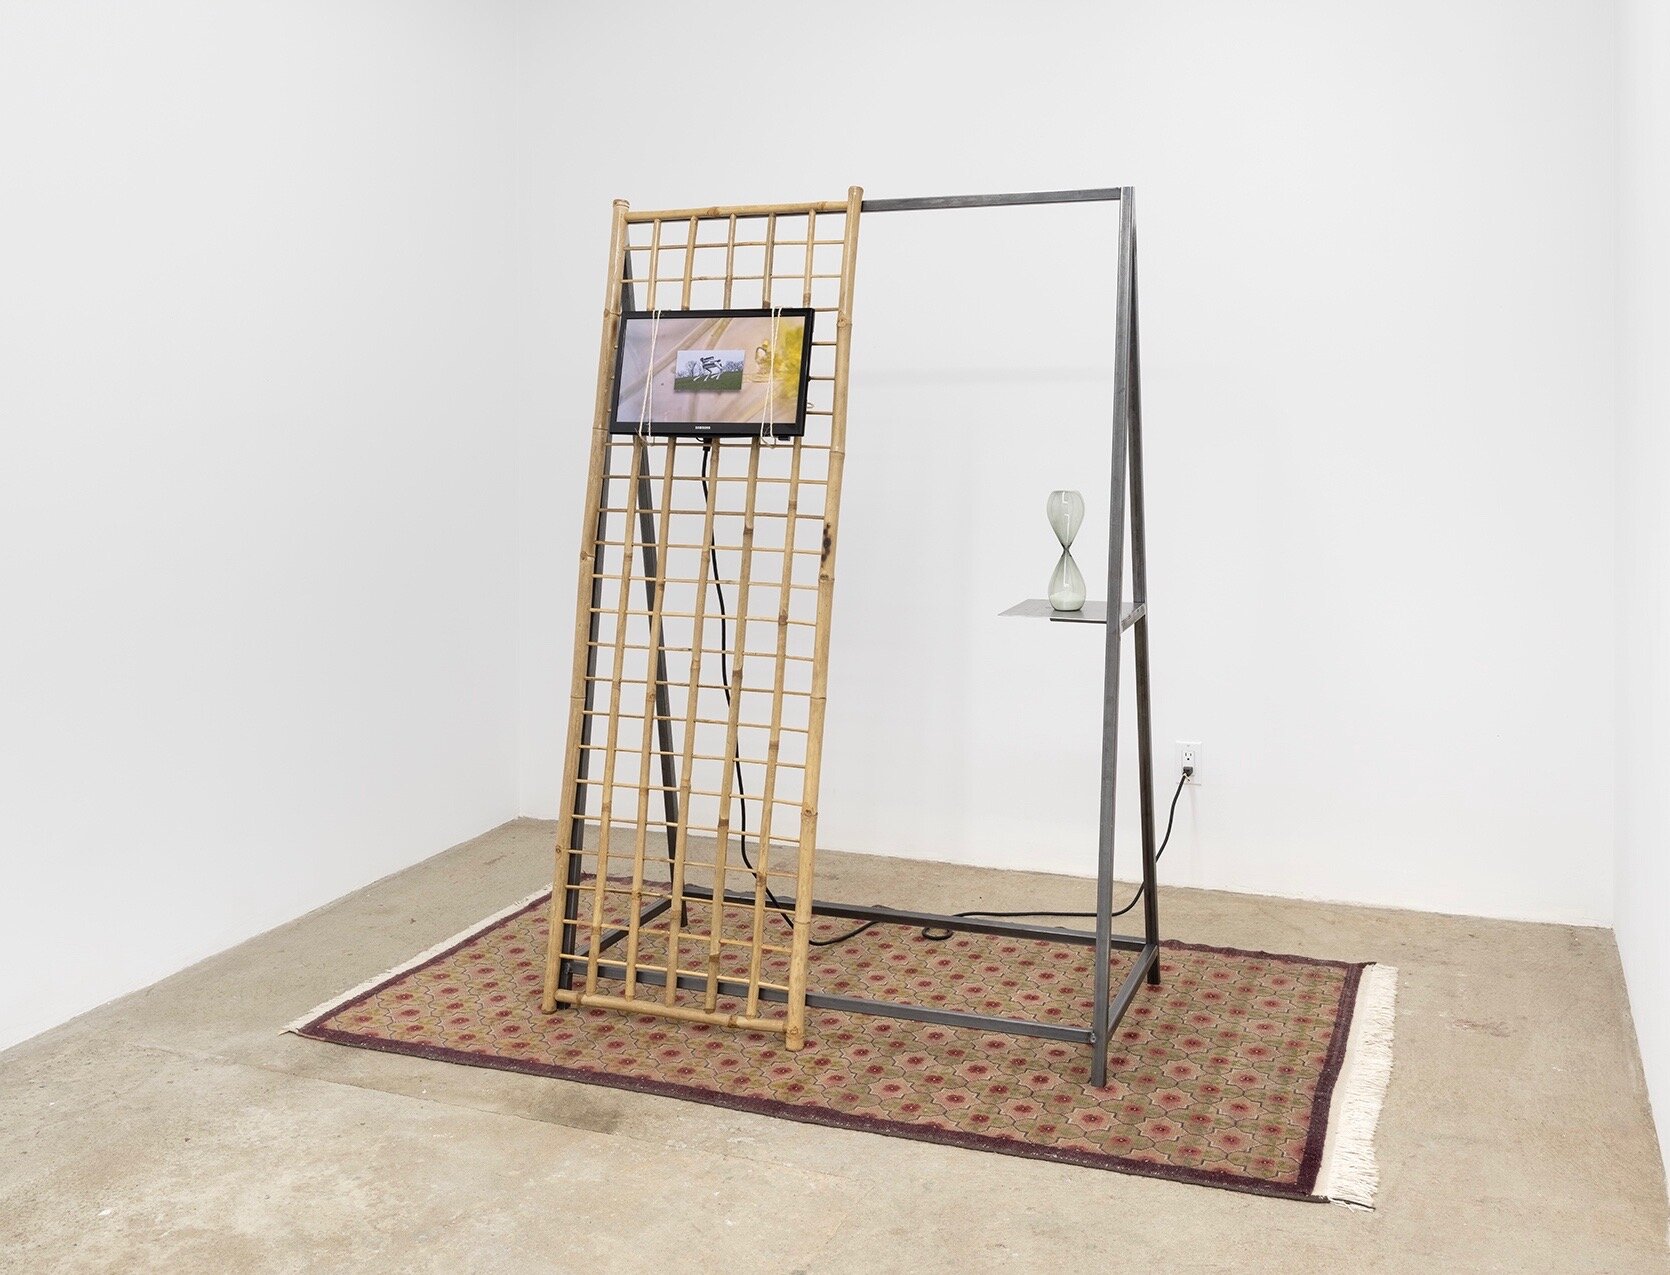  Connor McNicholas  Every Portal , 2020 Steel, bamboo, rug, television, hourglass, cables, electricity, hardware  86 x 48 x 70 inches (219 x 122 x 178 cm) TRT: 1 hour, 22 minutes 